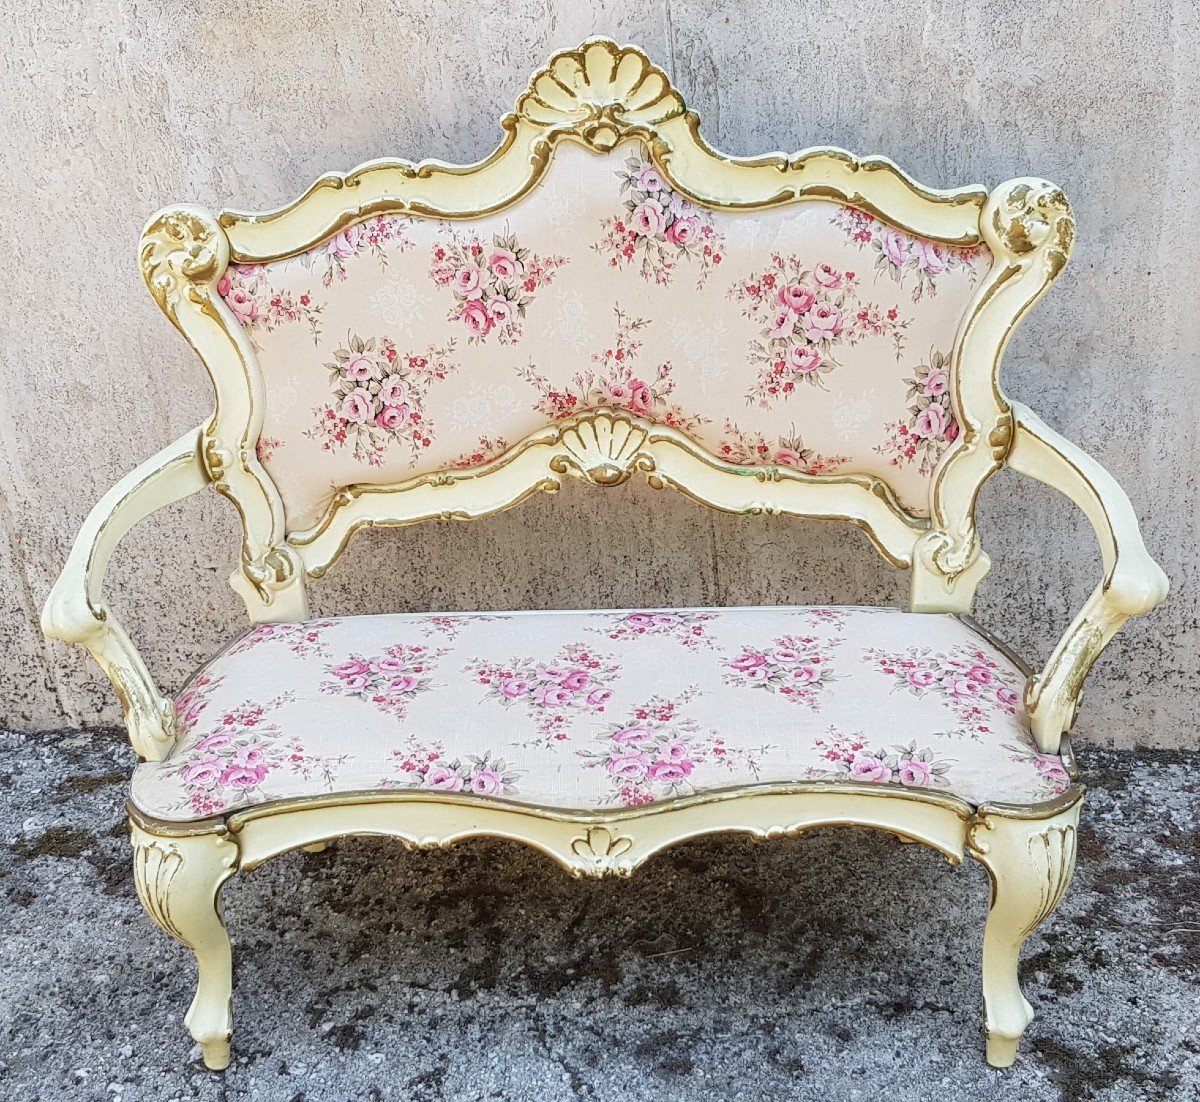 Miniature Living Room Louis XV Style Toy Furniture For Children In Plastic 1960s Canova Italy-photo-1